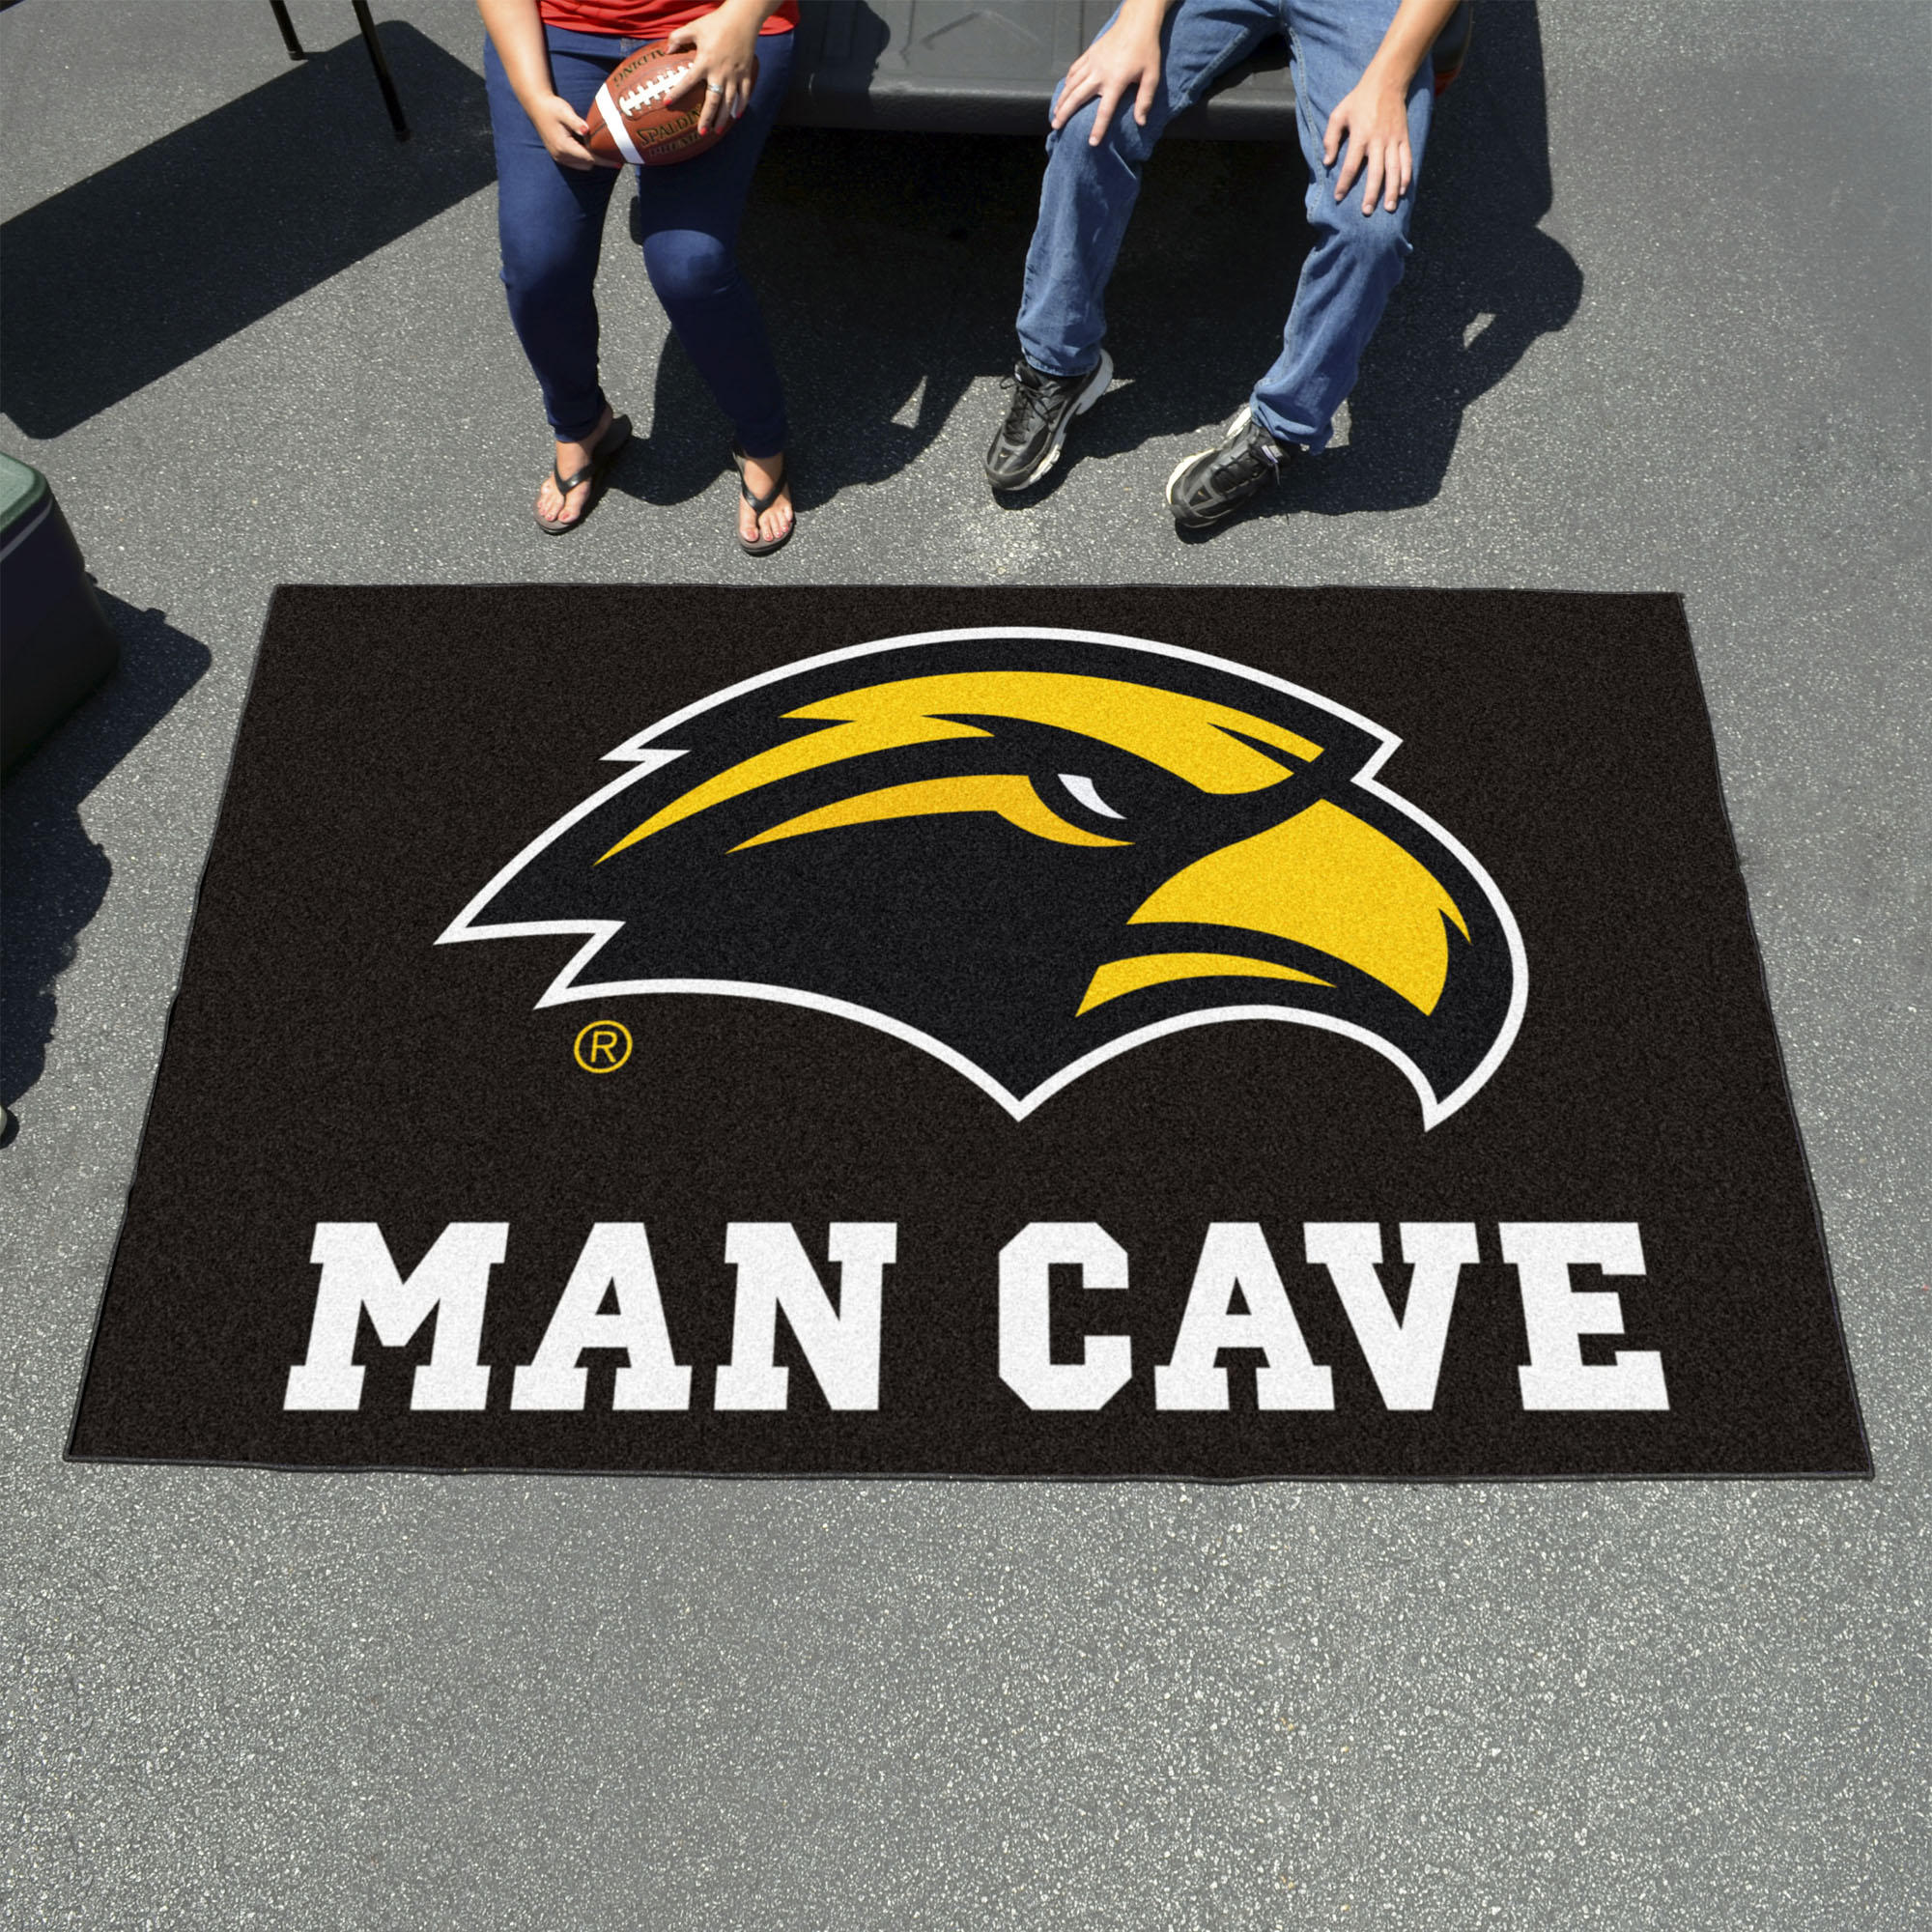 University of Southern Mississippi Man Cave Ulti-Mat - 60" x 96"